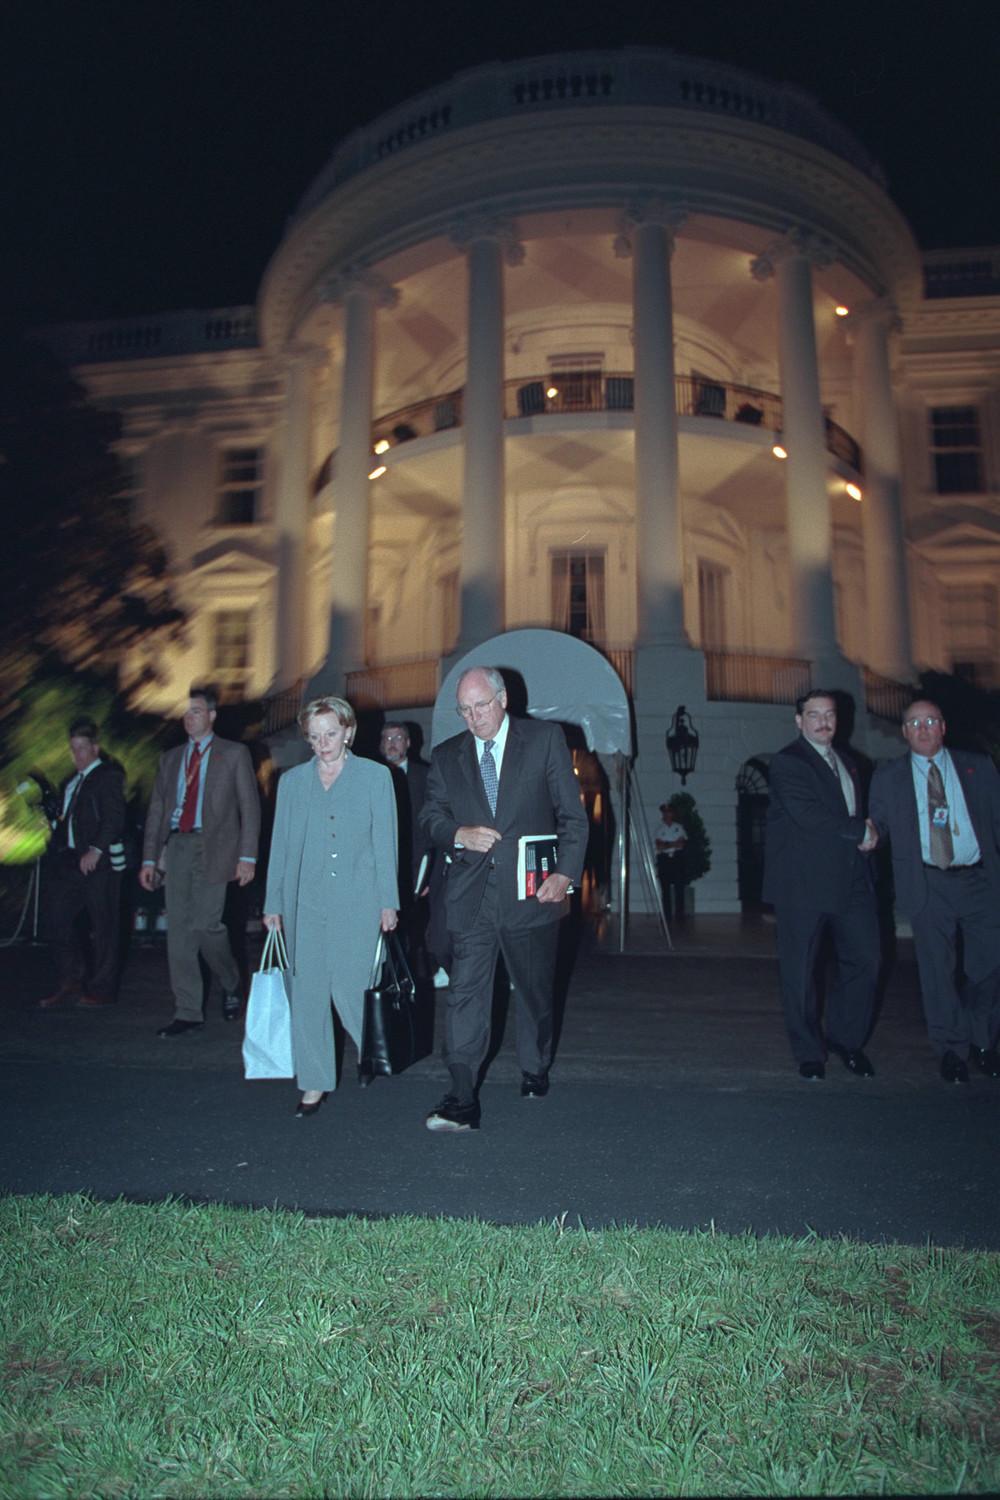 the-national-archive-just-released-photos-of-dick-cheney-during-911-265-806-1437773894-size_1000.jpg